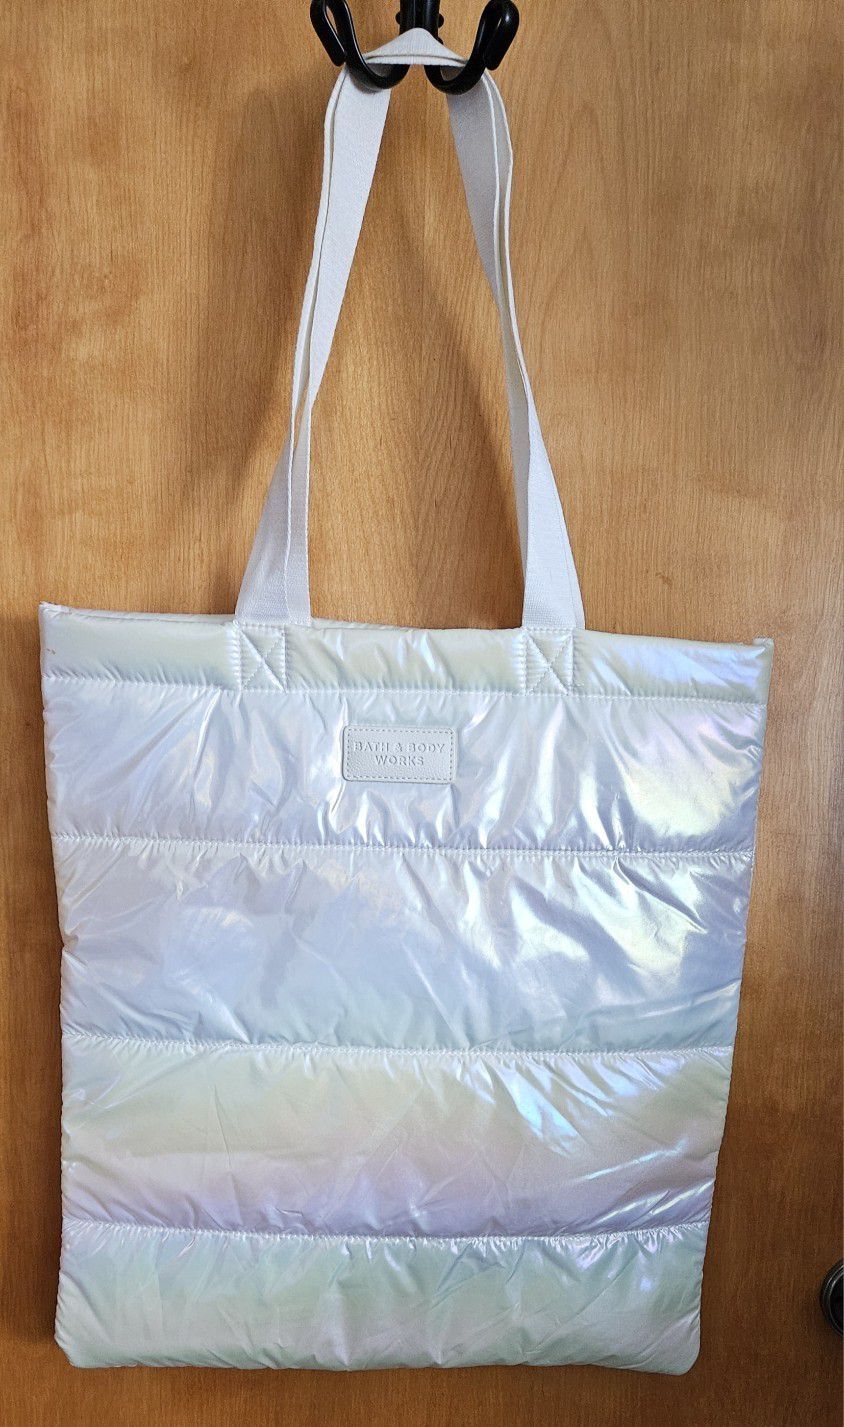 Bath and Body Works Large Iridescent Tote Bag Limited Edition Sold out in store

